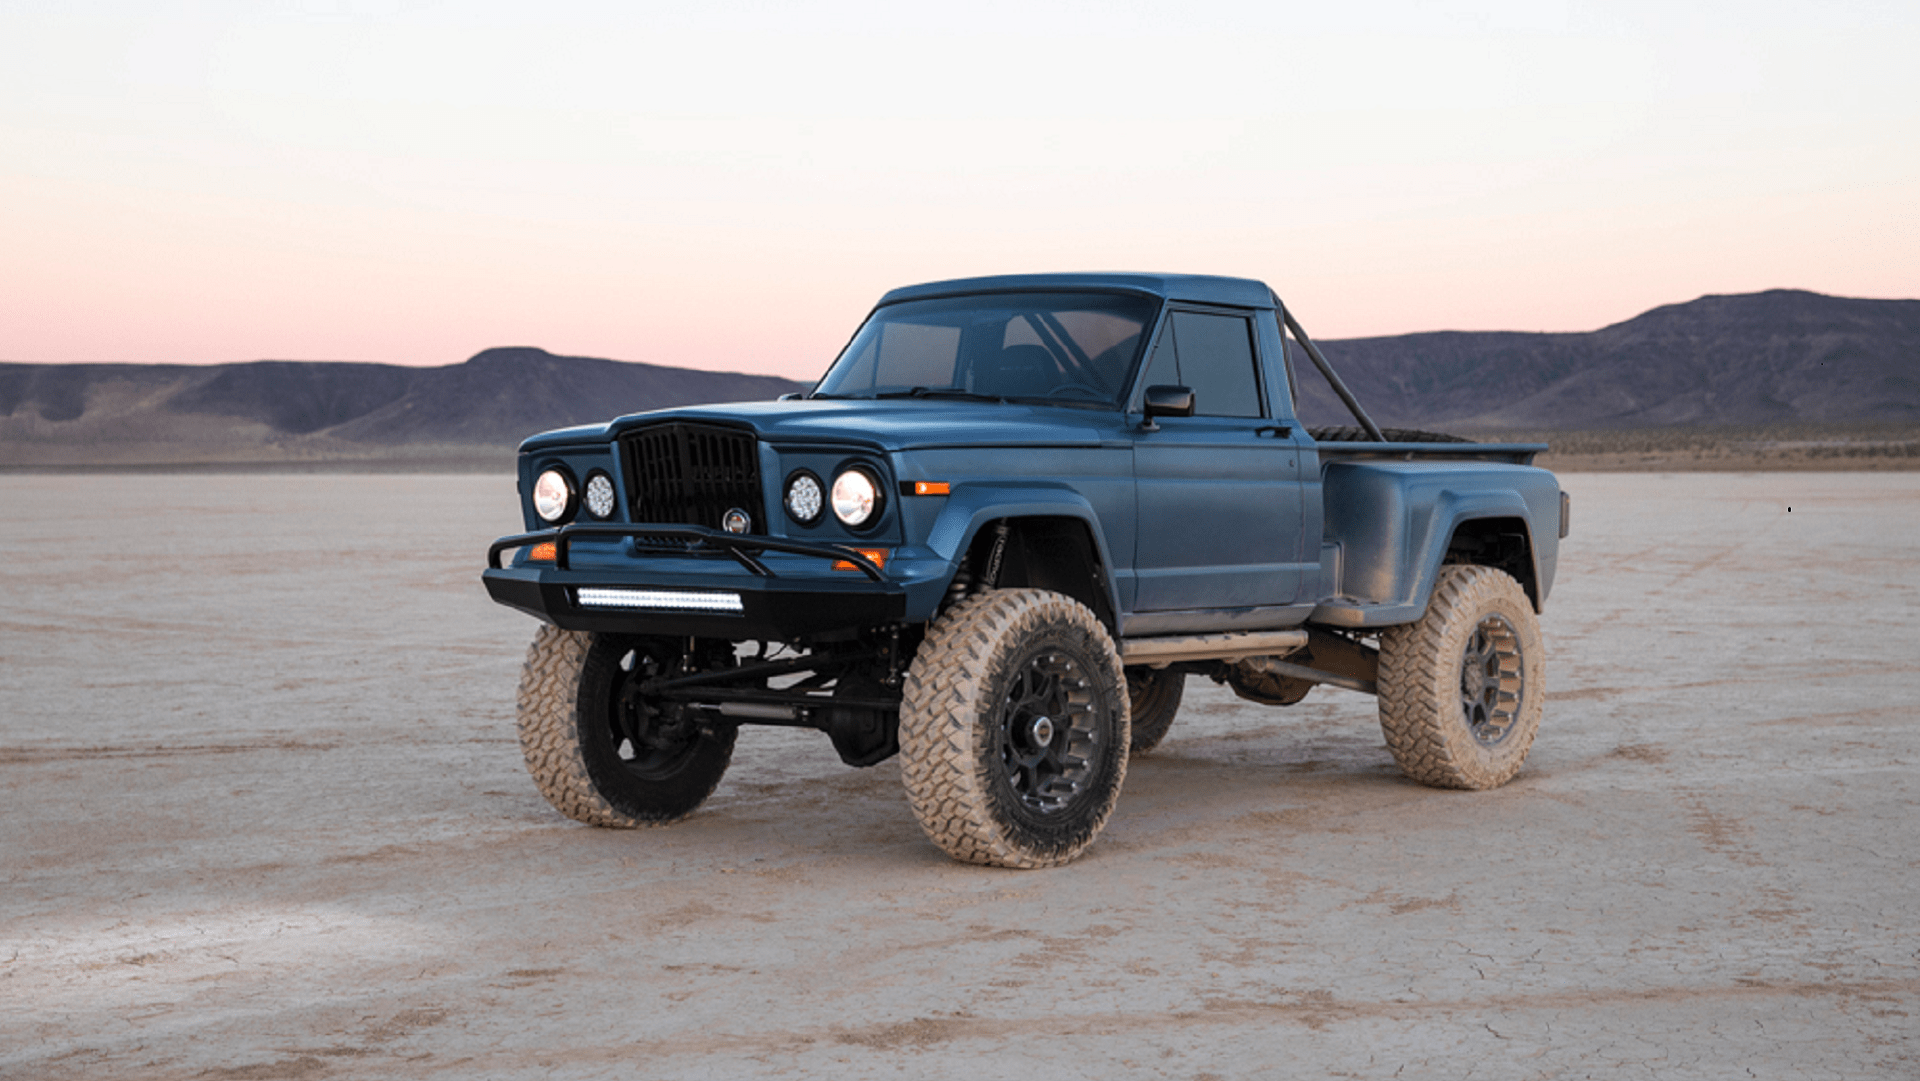 This Viper-Powered Jeep J10 Pickup Truck Is What the Gladiator Could’ve Been